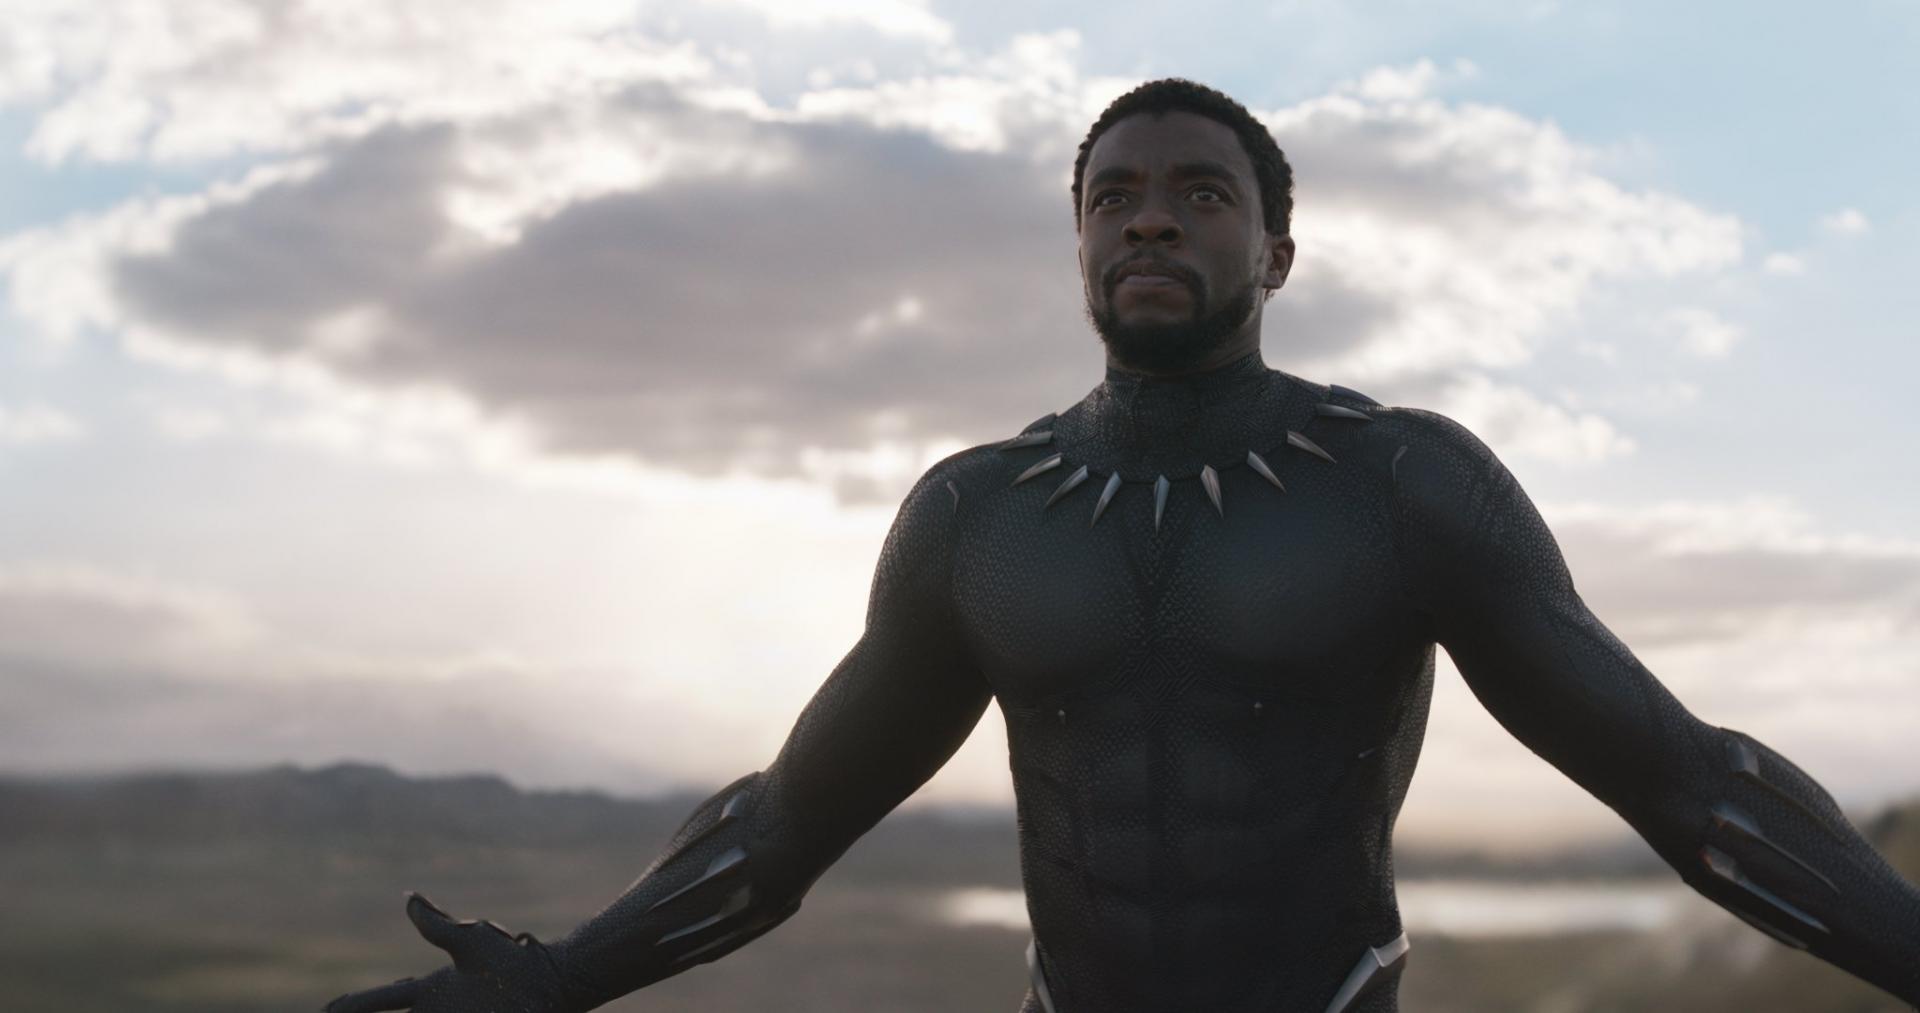 Black Panther: All hail the King